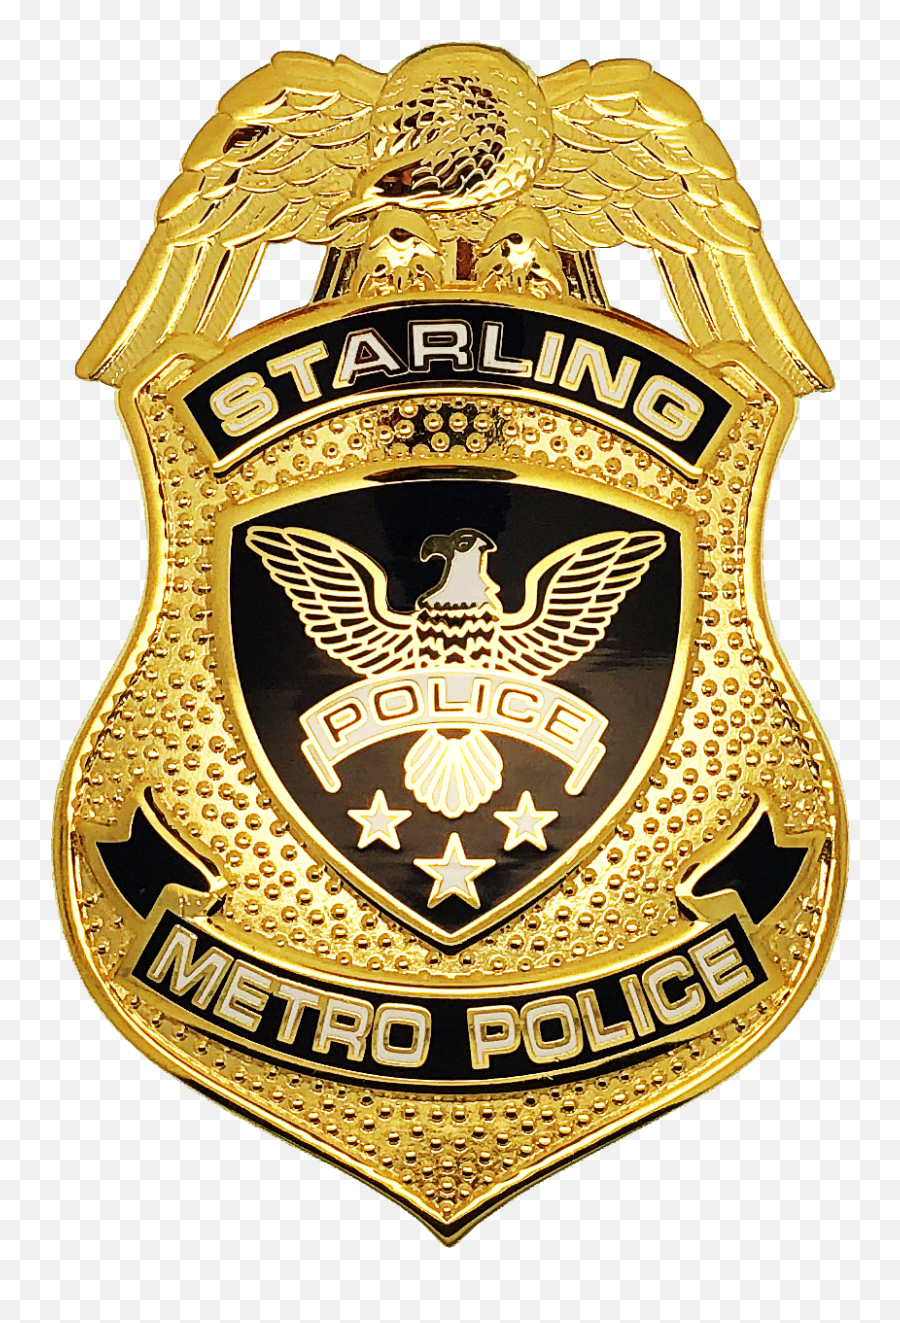 Metro Police Police Patches Police - Starling City Police Department Badge Emoji,Lapd Logo